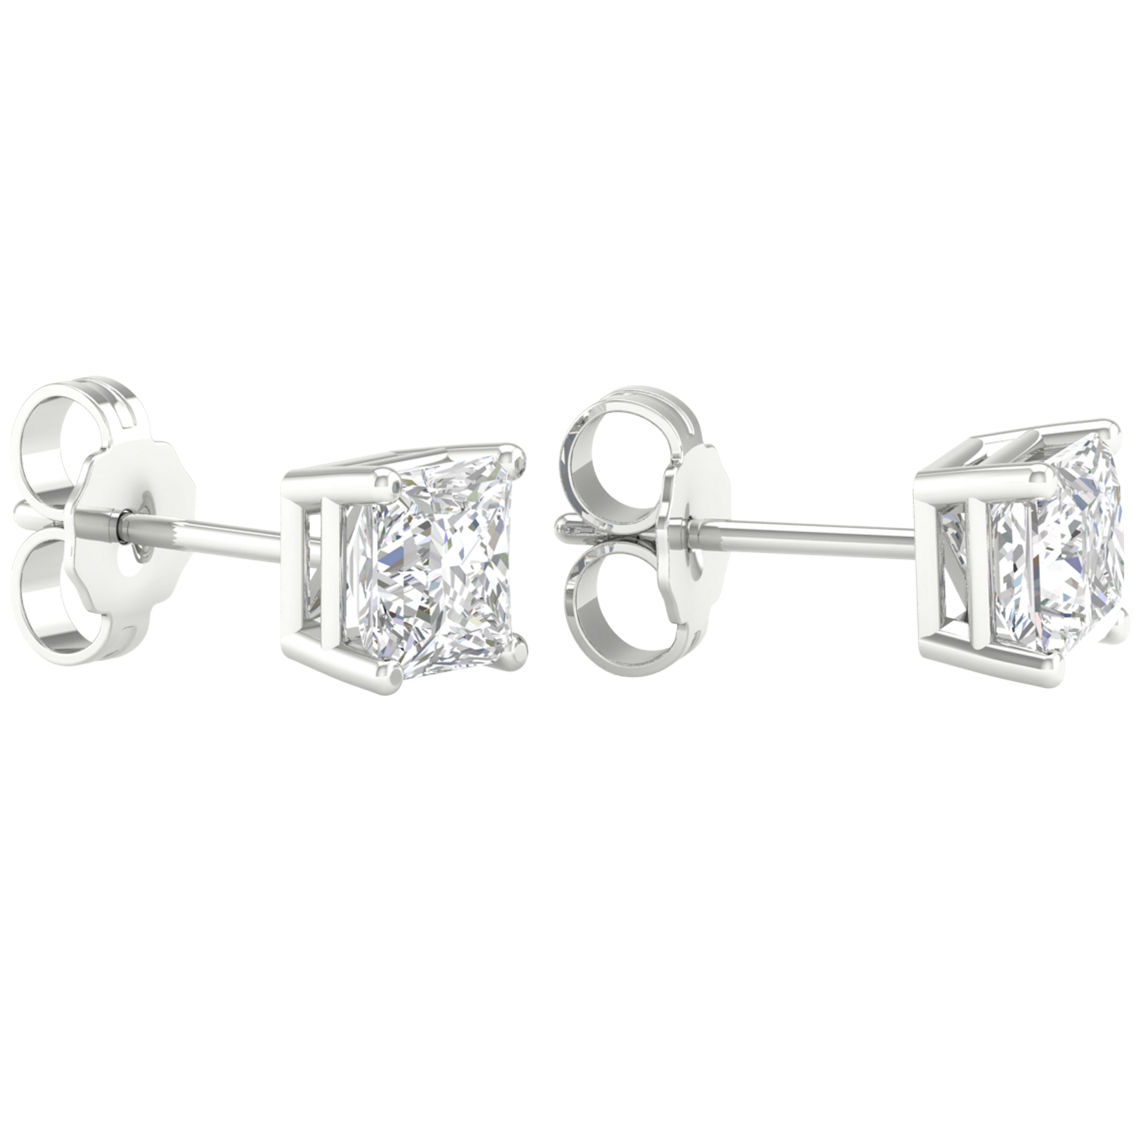 Pure Brilliance 14K White Gold 1 1/2 CTW Stud Earrings with IGI Certification - Image 2 of 2